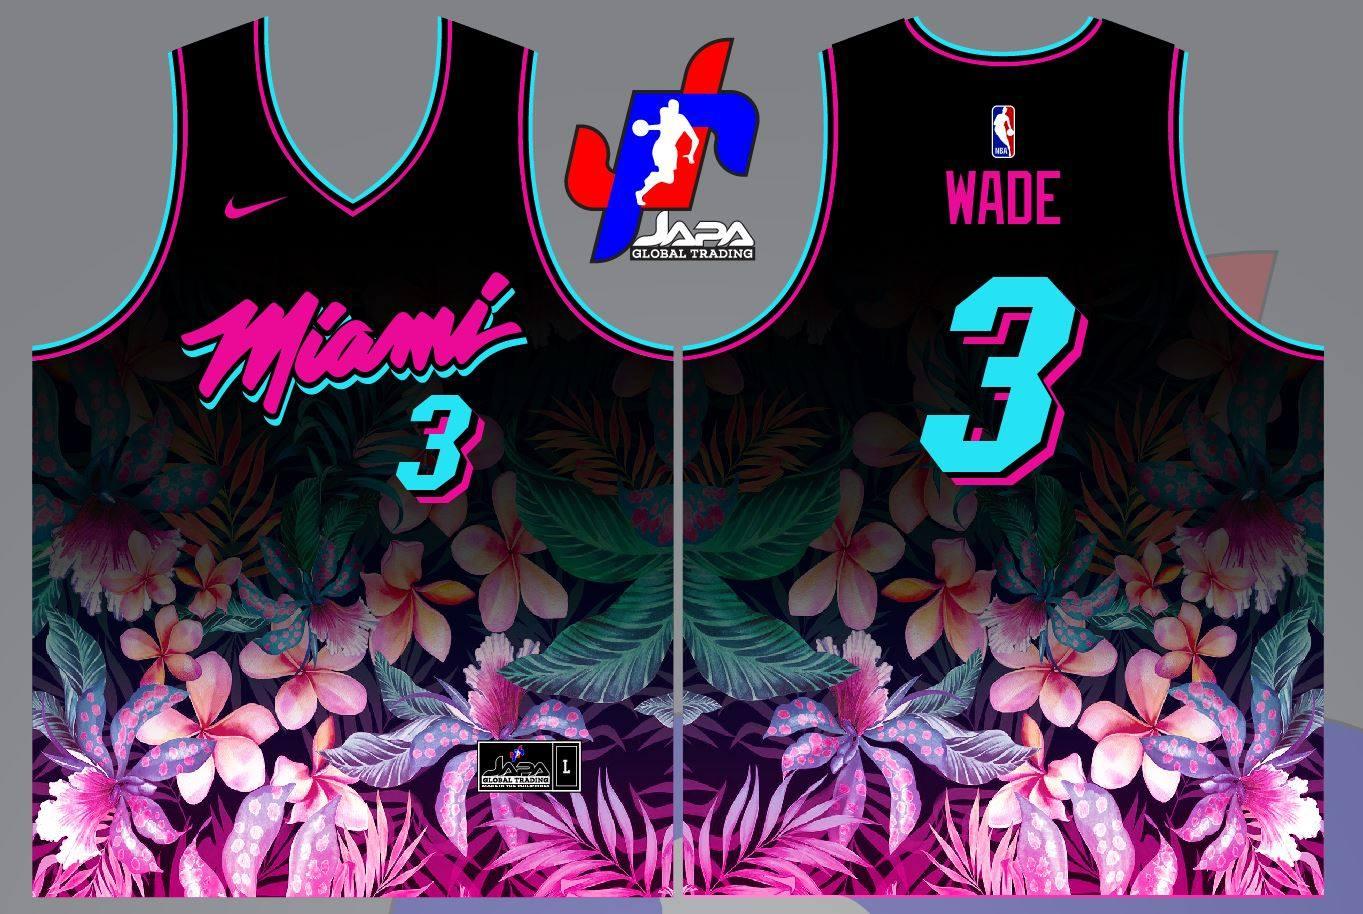 Full Sublimated NBA Jersey Collection 